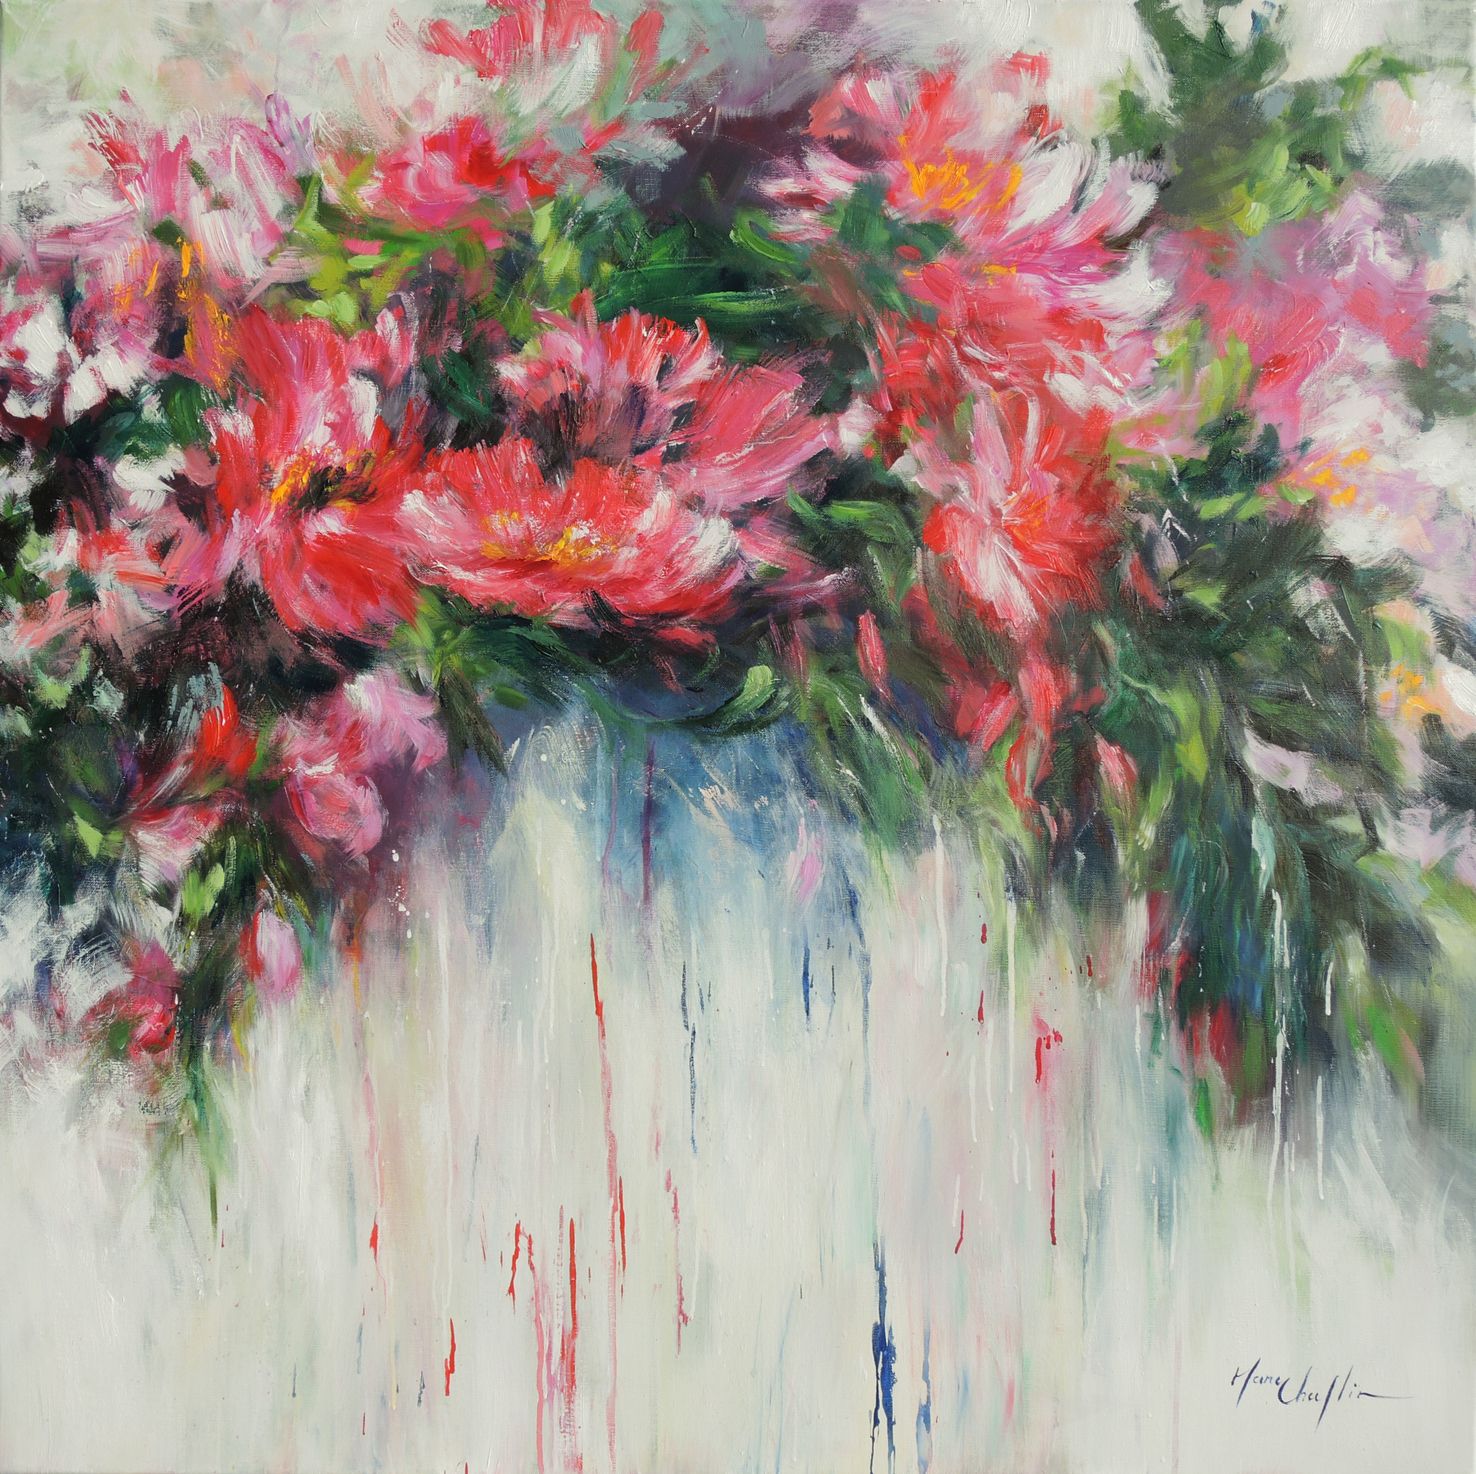 Peonies after the shower by Mary Chaplin